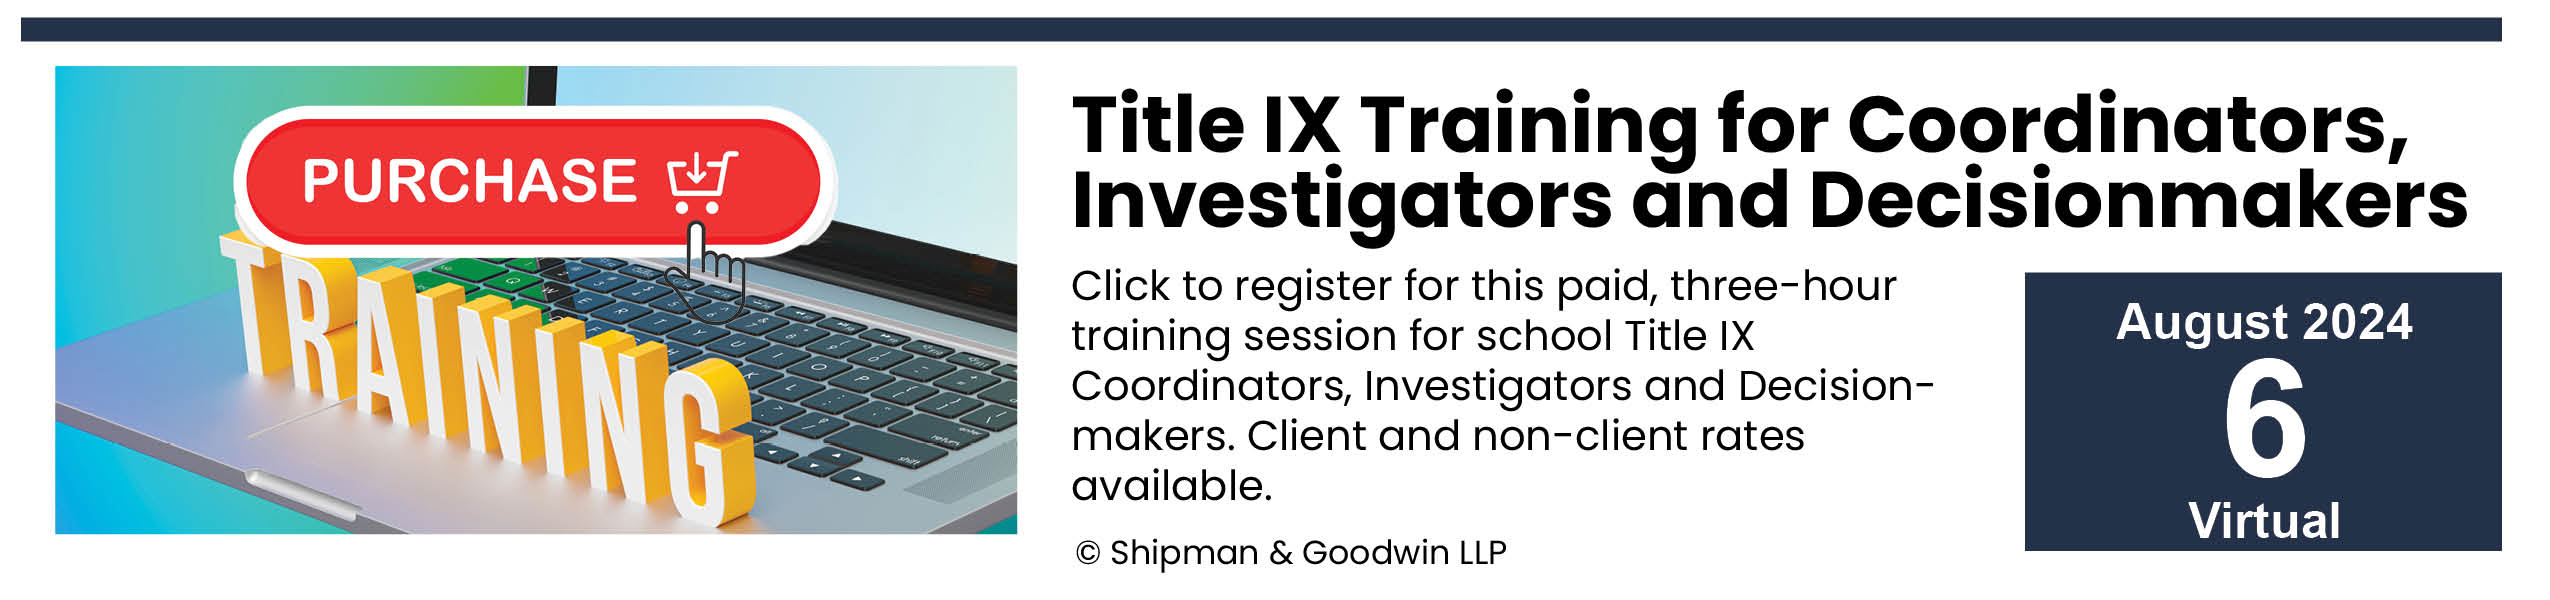 Click to purchase Title IX Training for Coord/Invest/Decisionmakers August 6, 2024